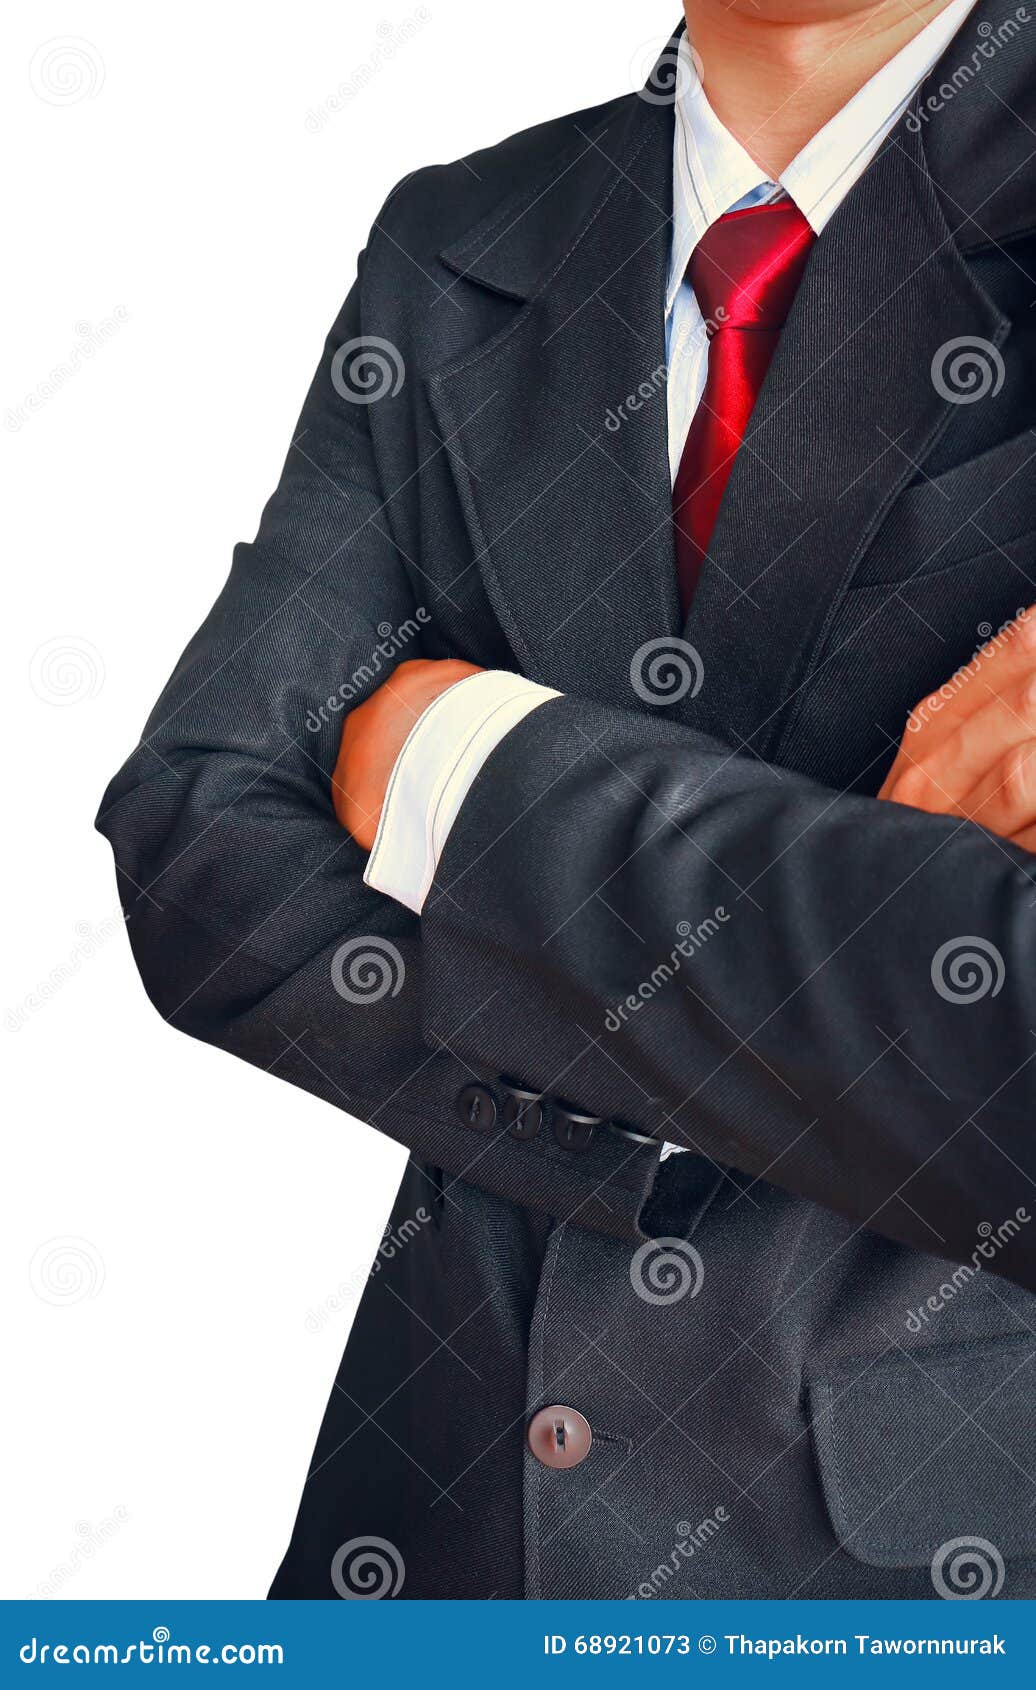 Portrait Of Business Man In Suit With Red Tie Stock Image - Image of